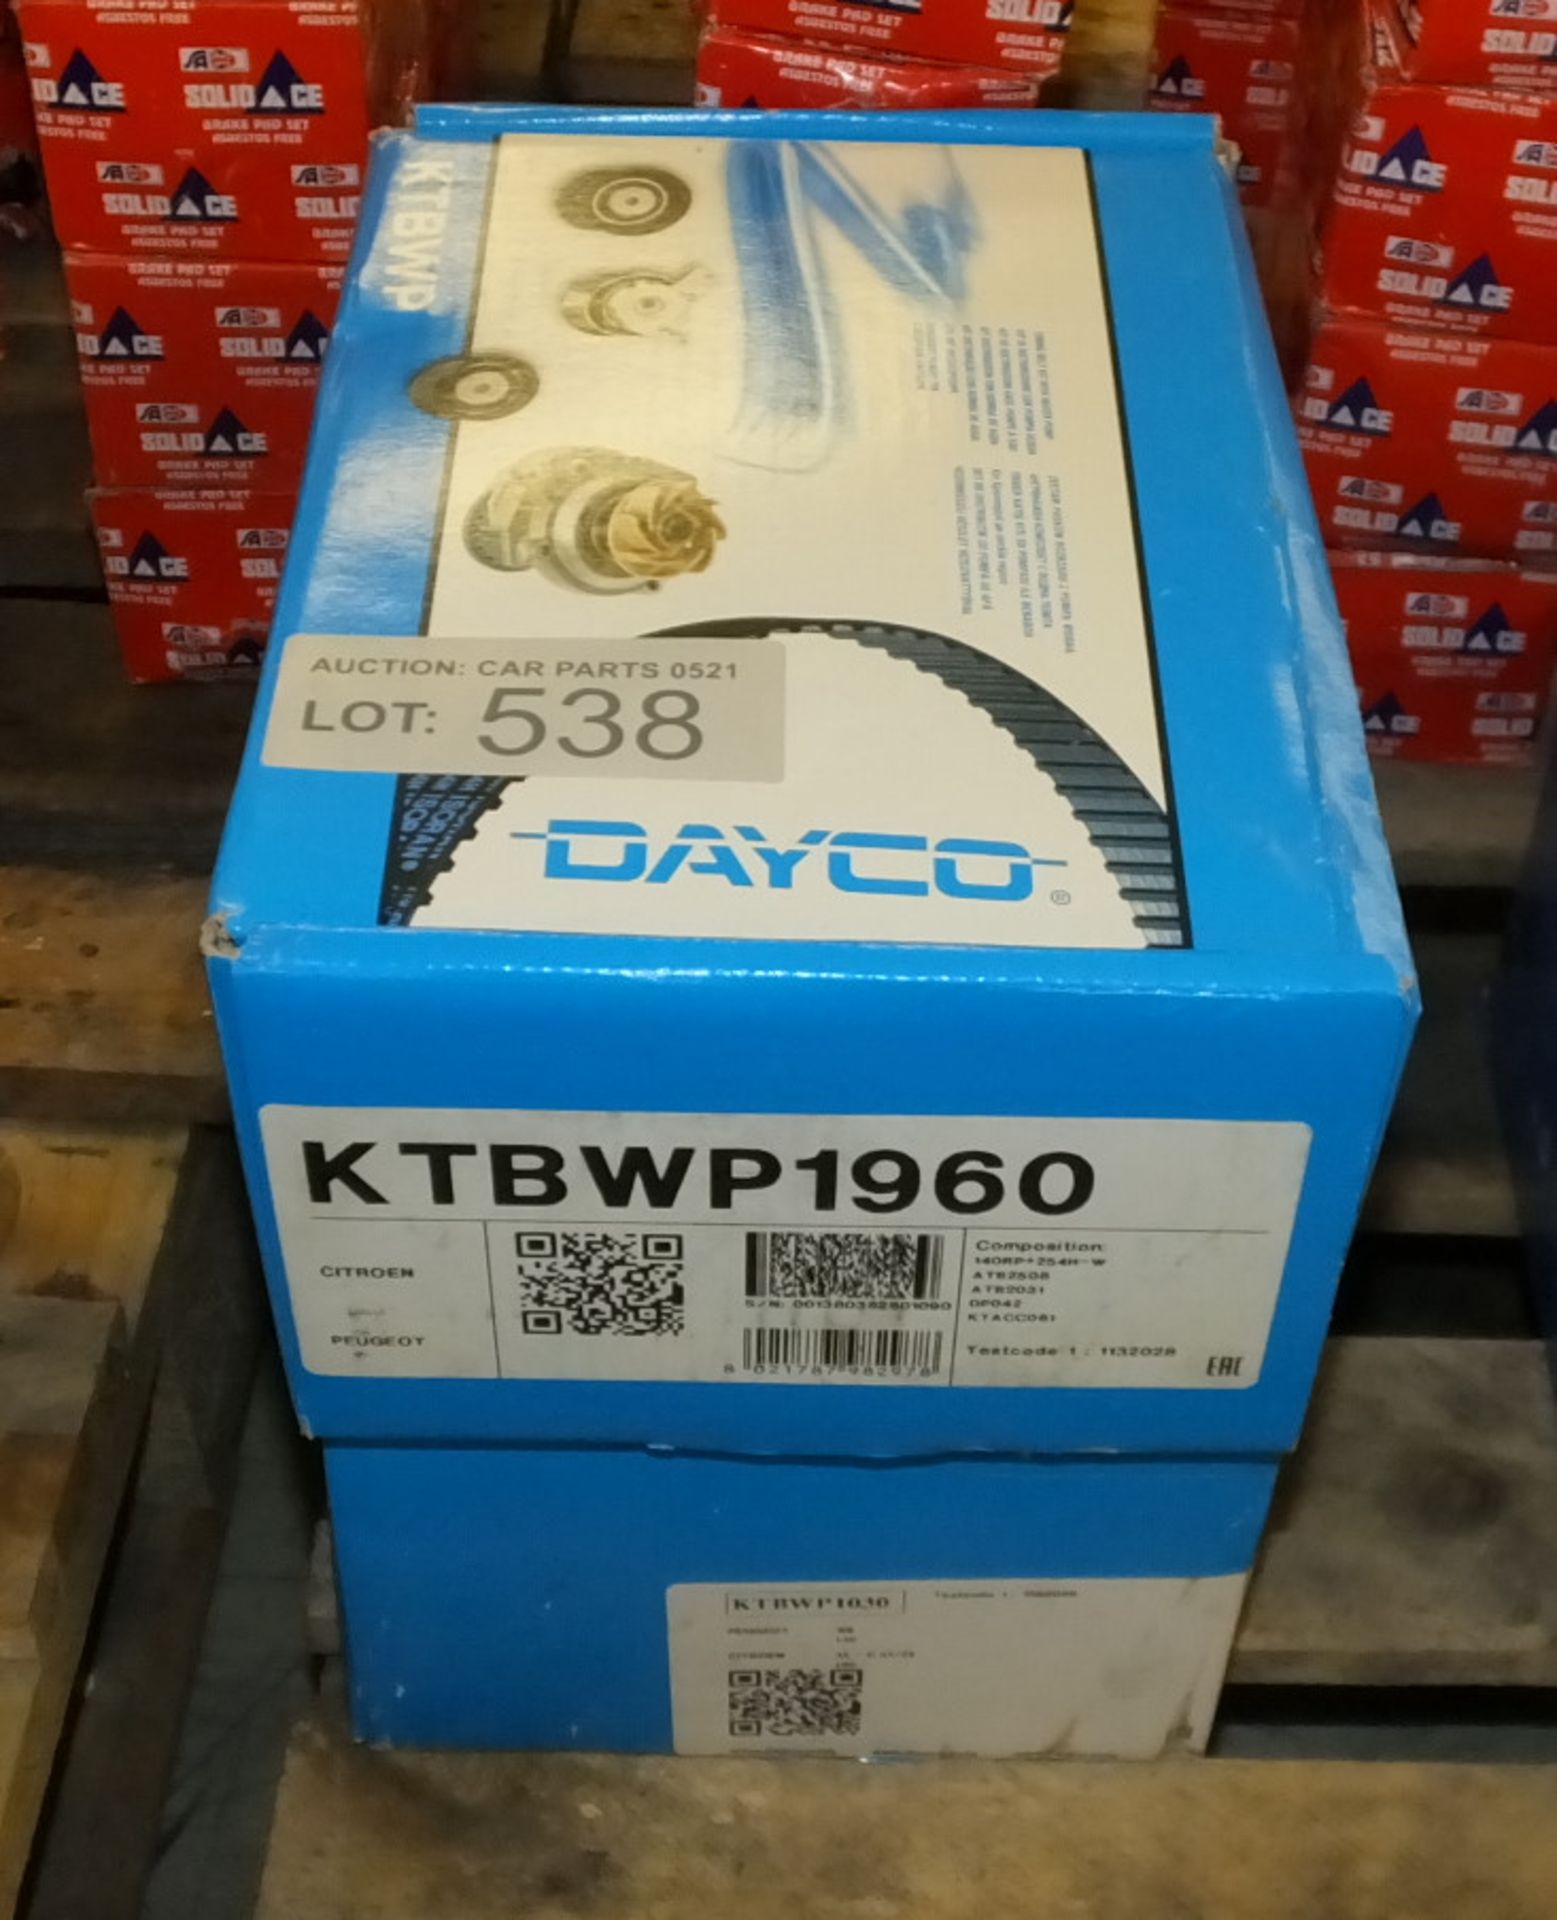 2x Dayco Timing belt kits - check pictures for models